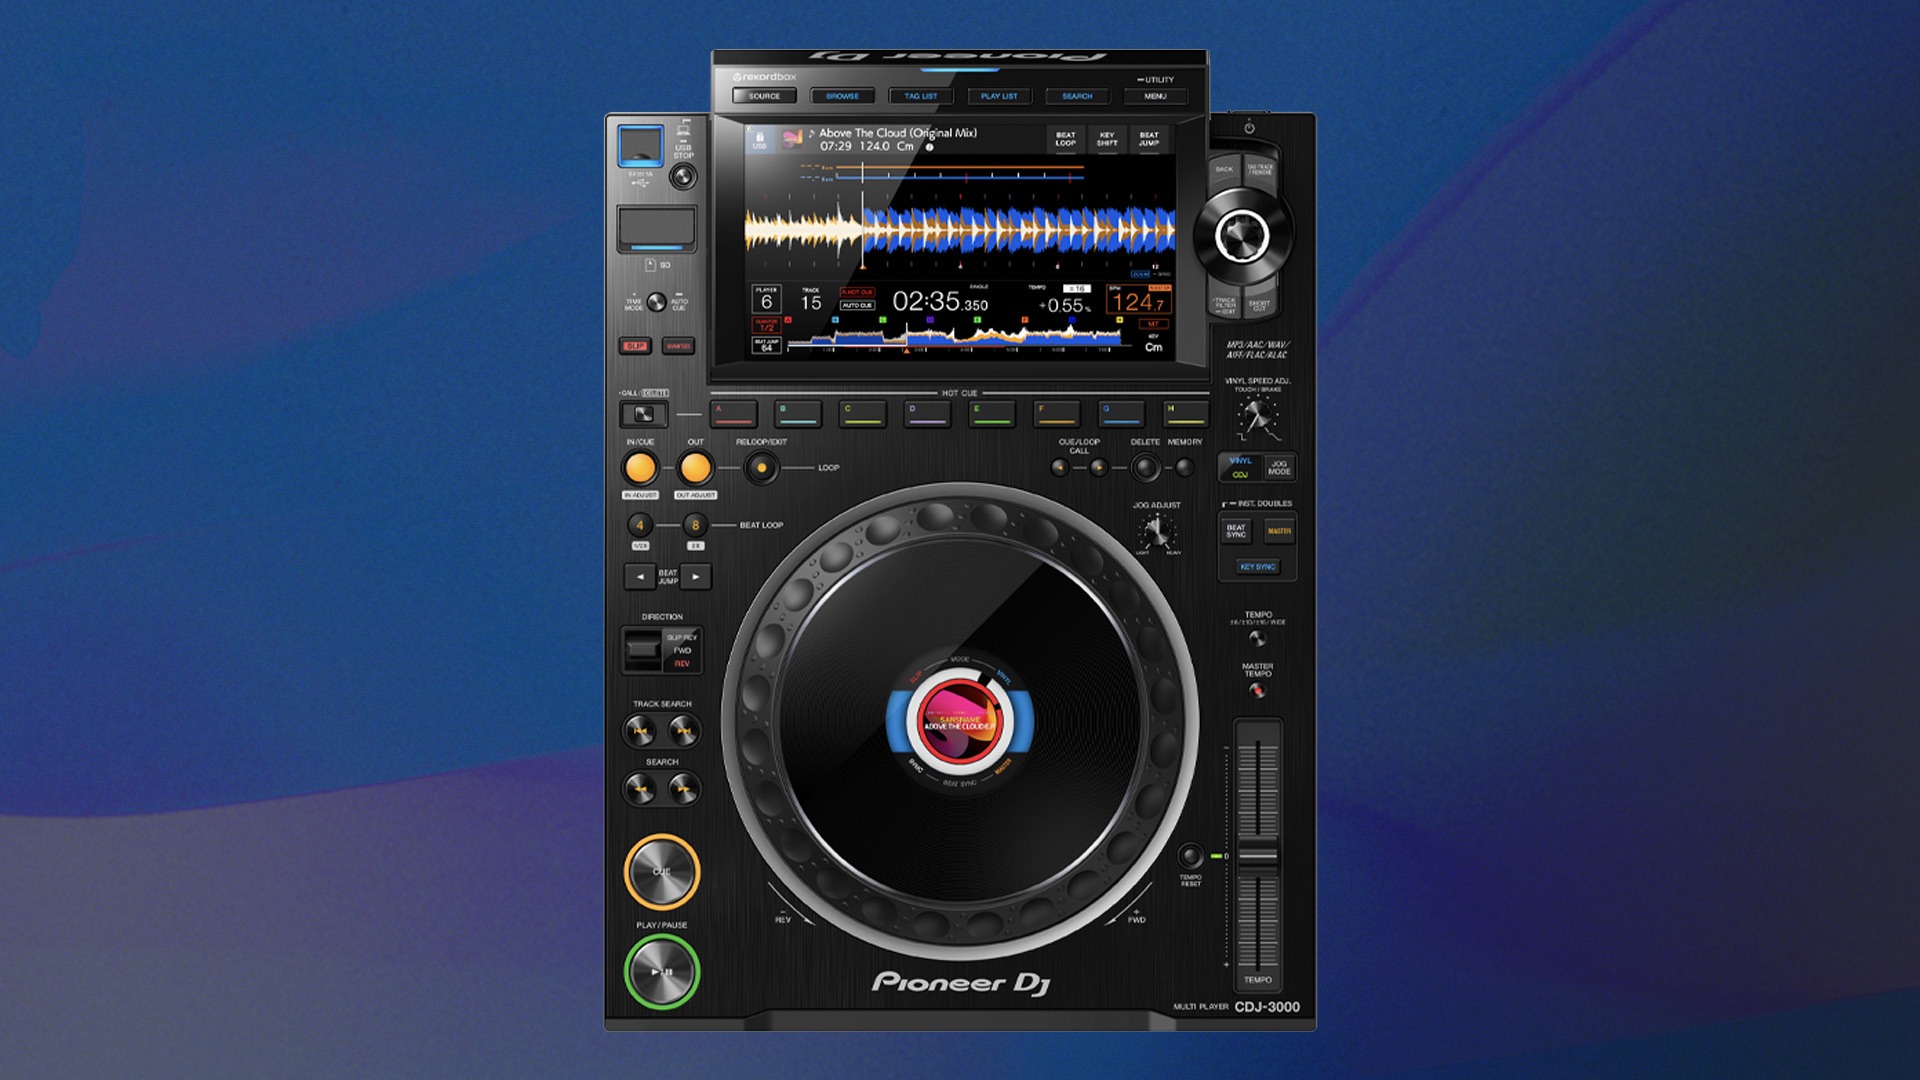 Five things we learned about the new Pioneer DJ CDJ-3000